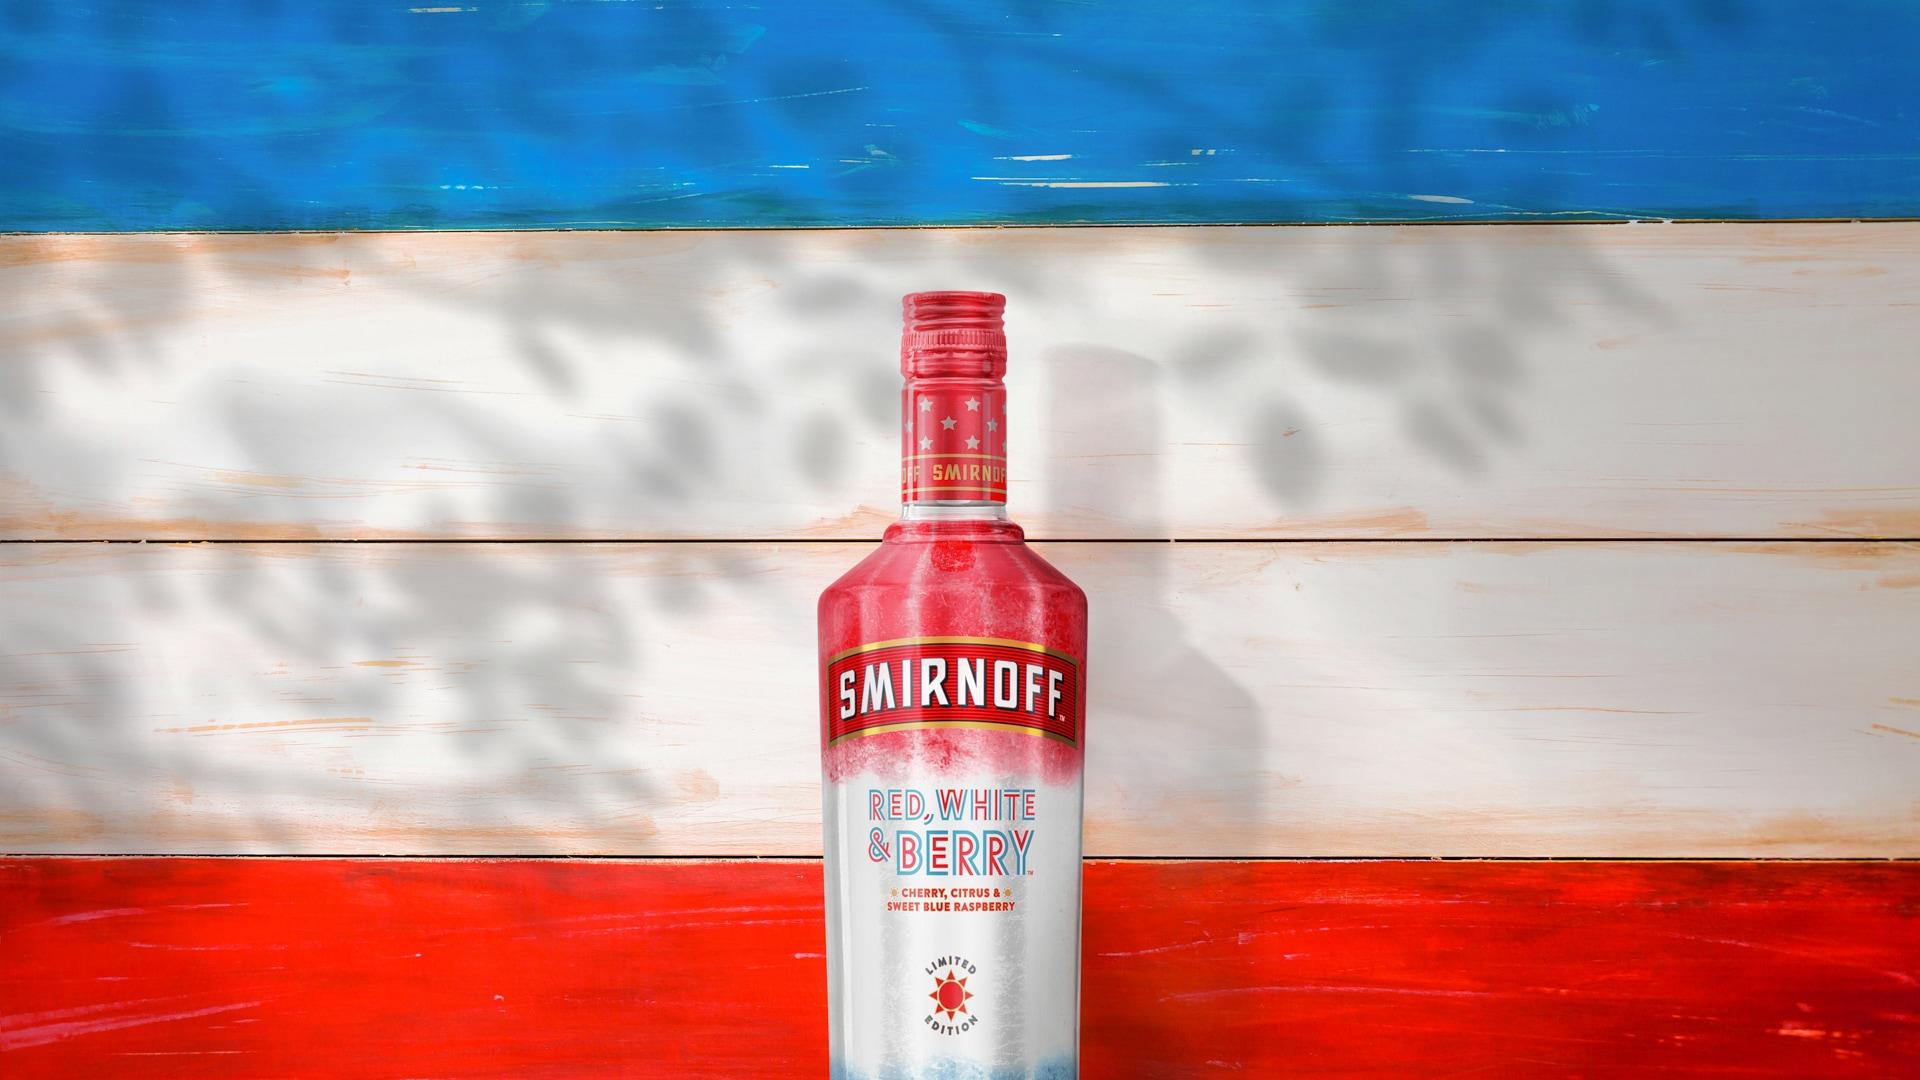 Smirnoff Red, White & Berry on a wood background